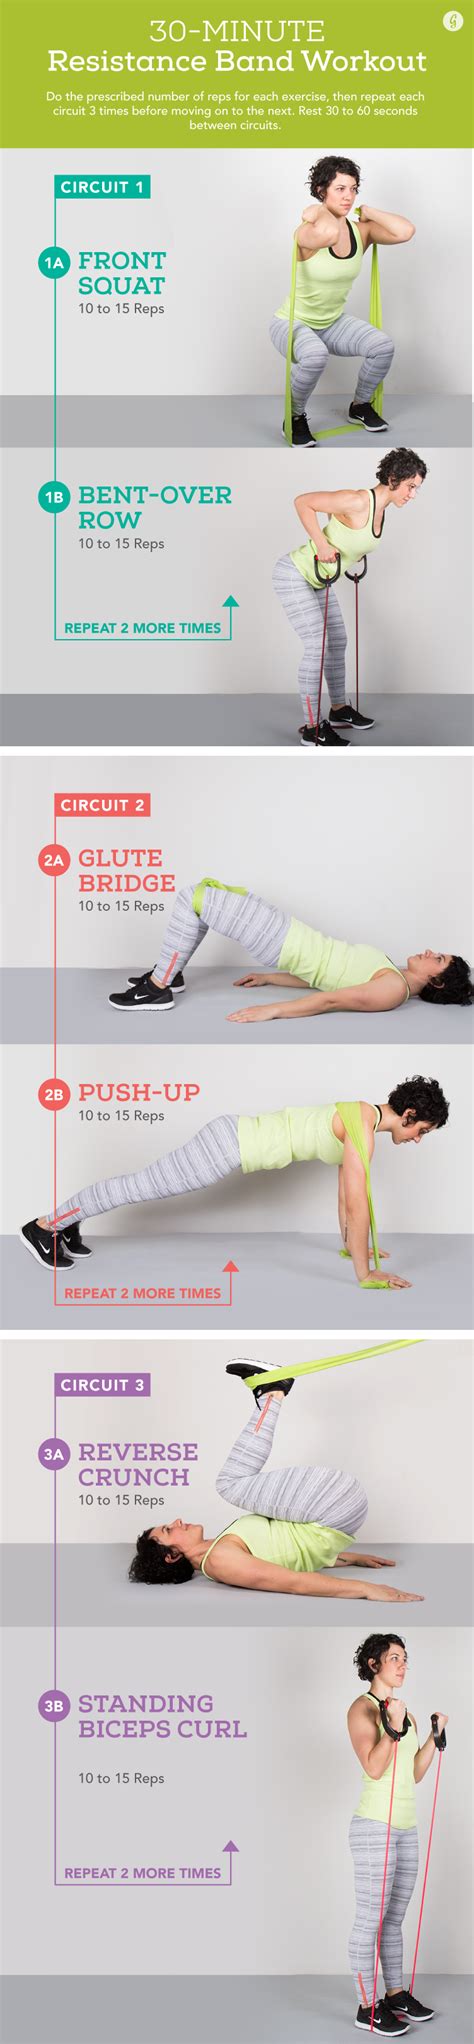 Resistance Band Circuit Training Workouts